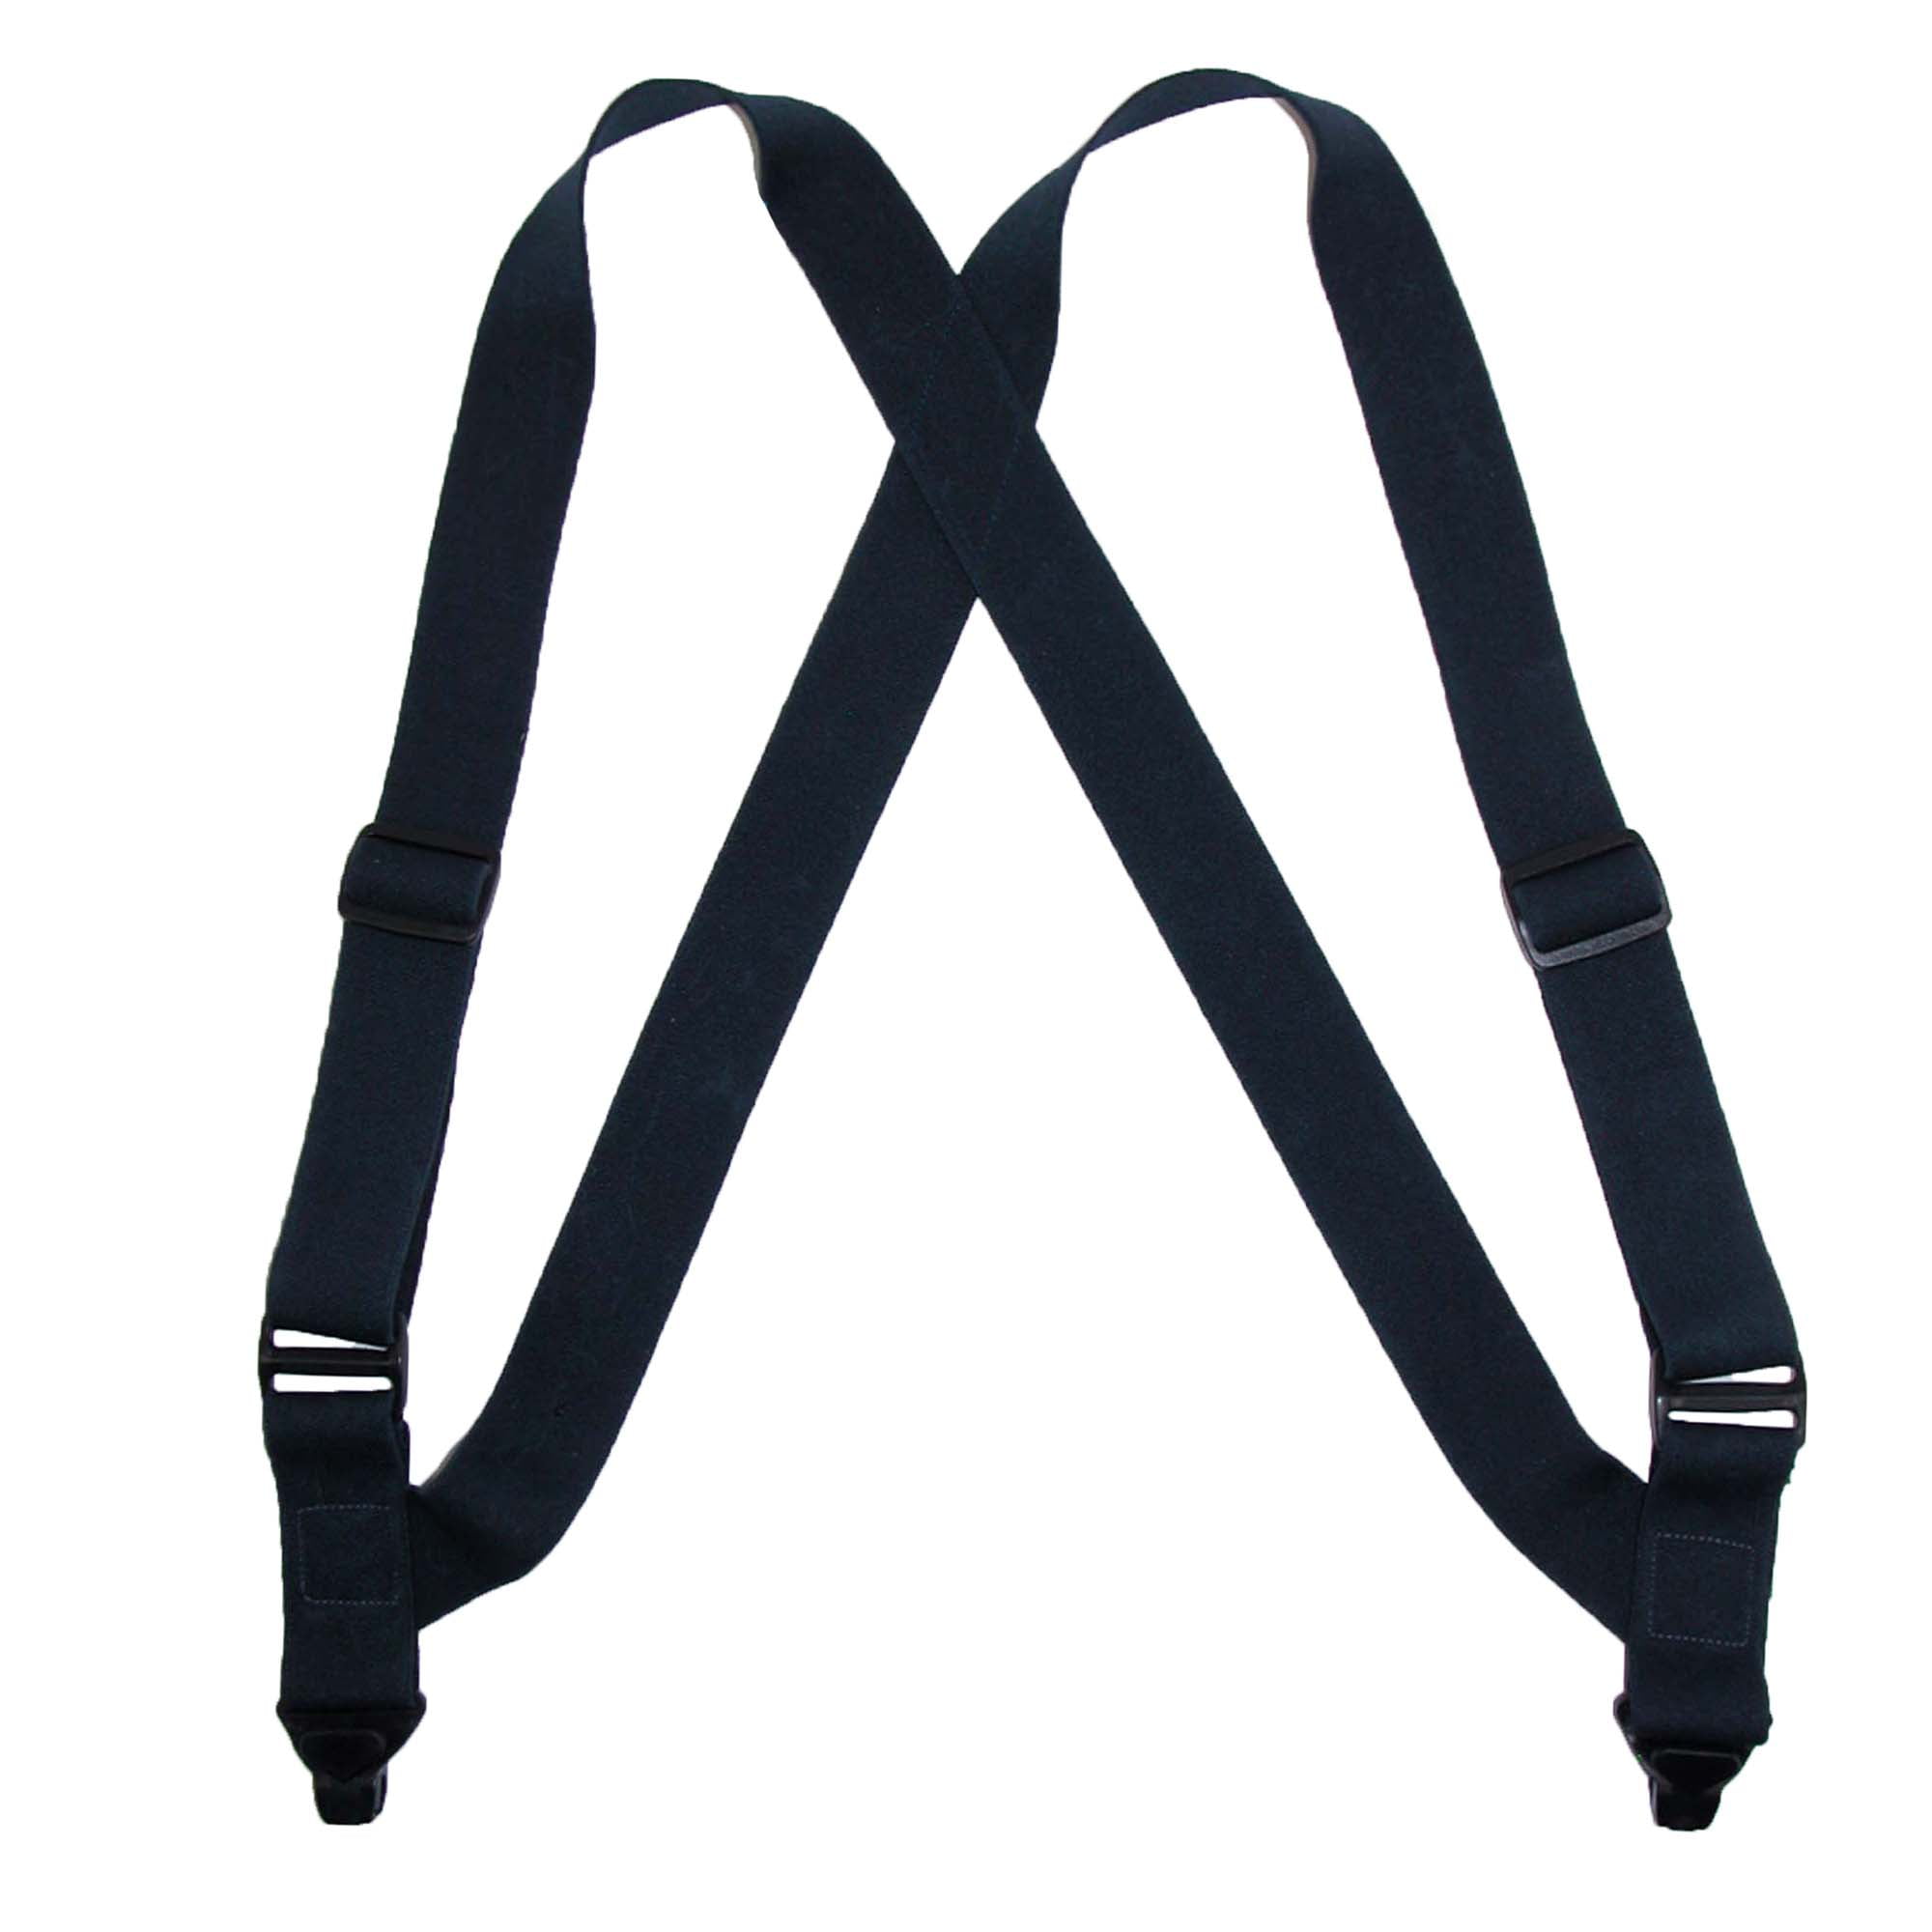 A33 Suspender Clip With Plastic Inset • A+ Products Inc